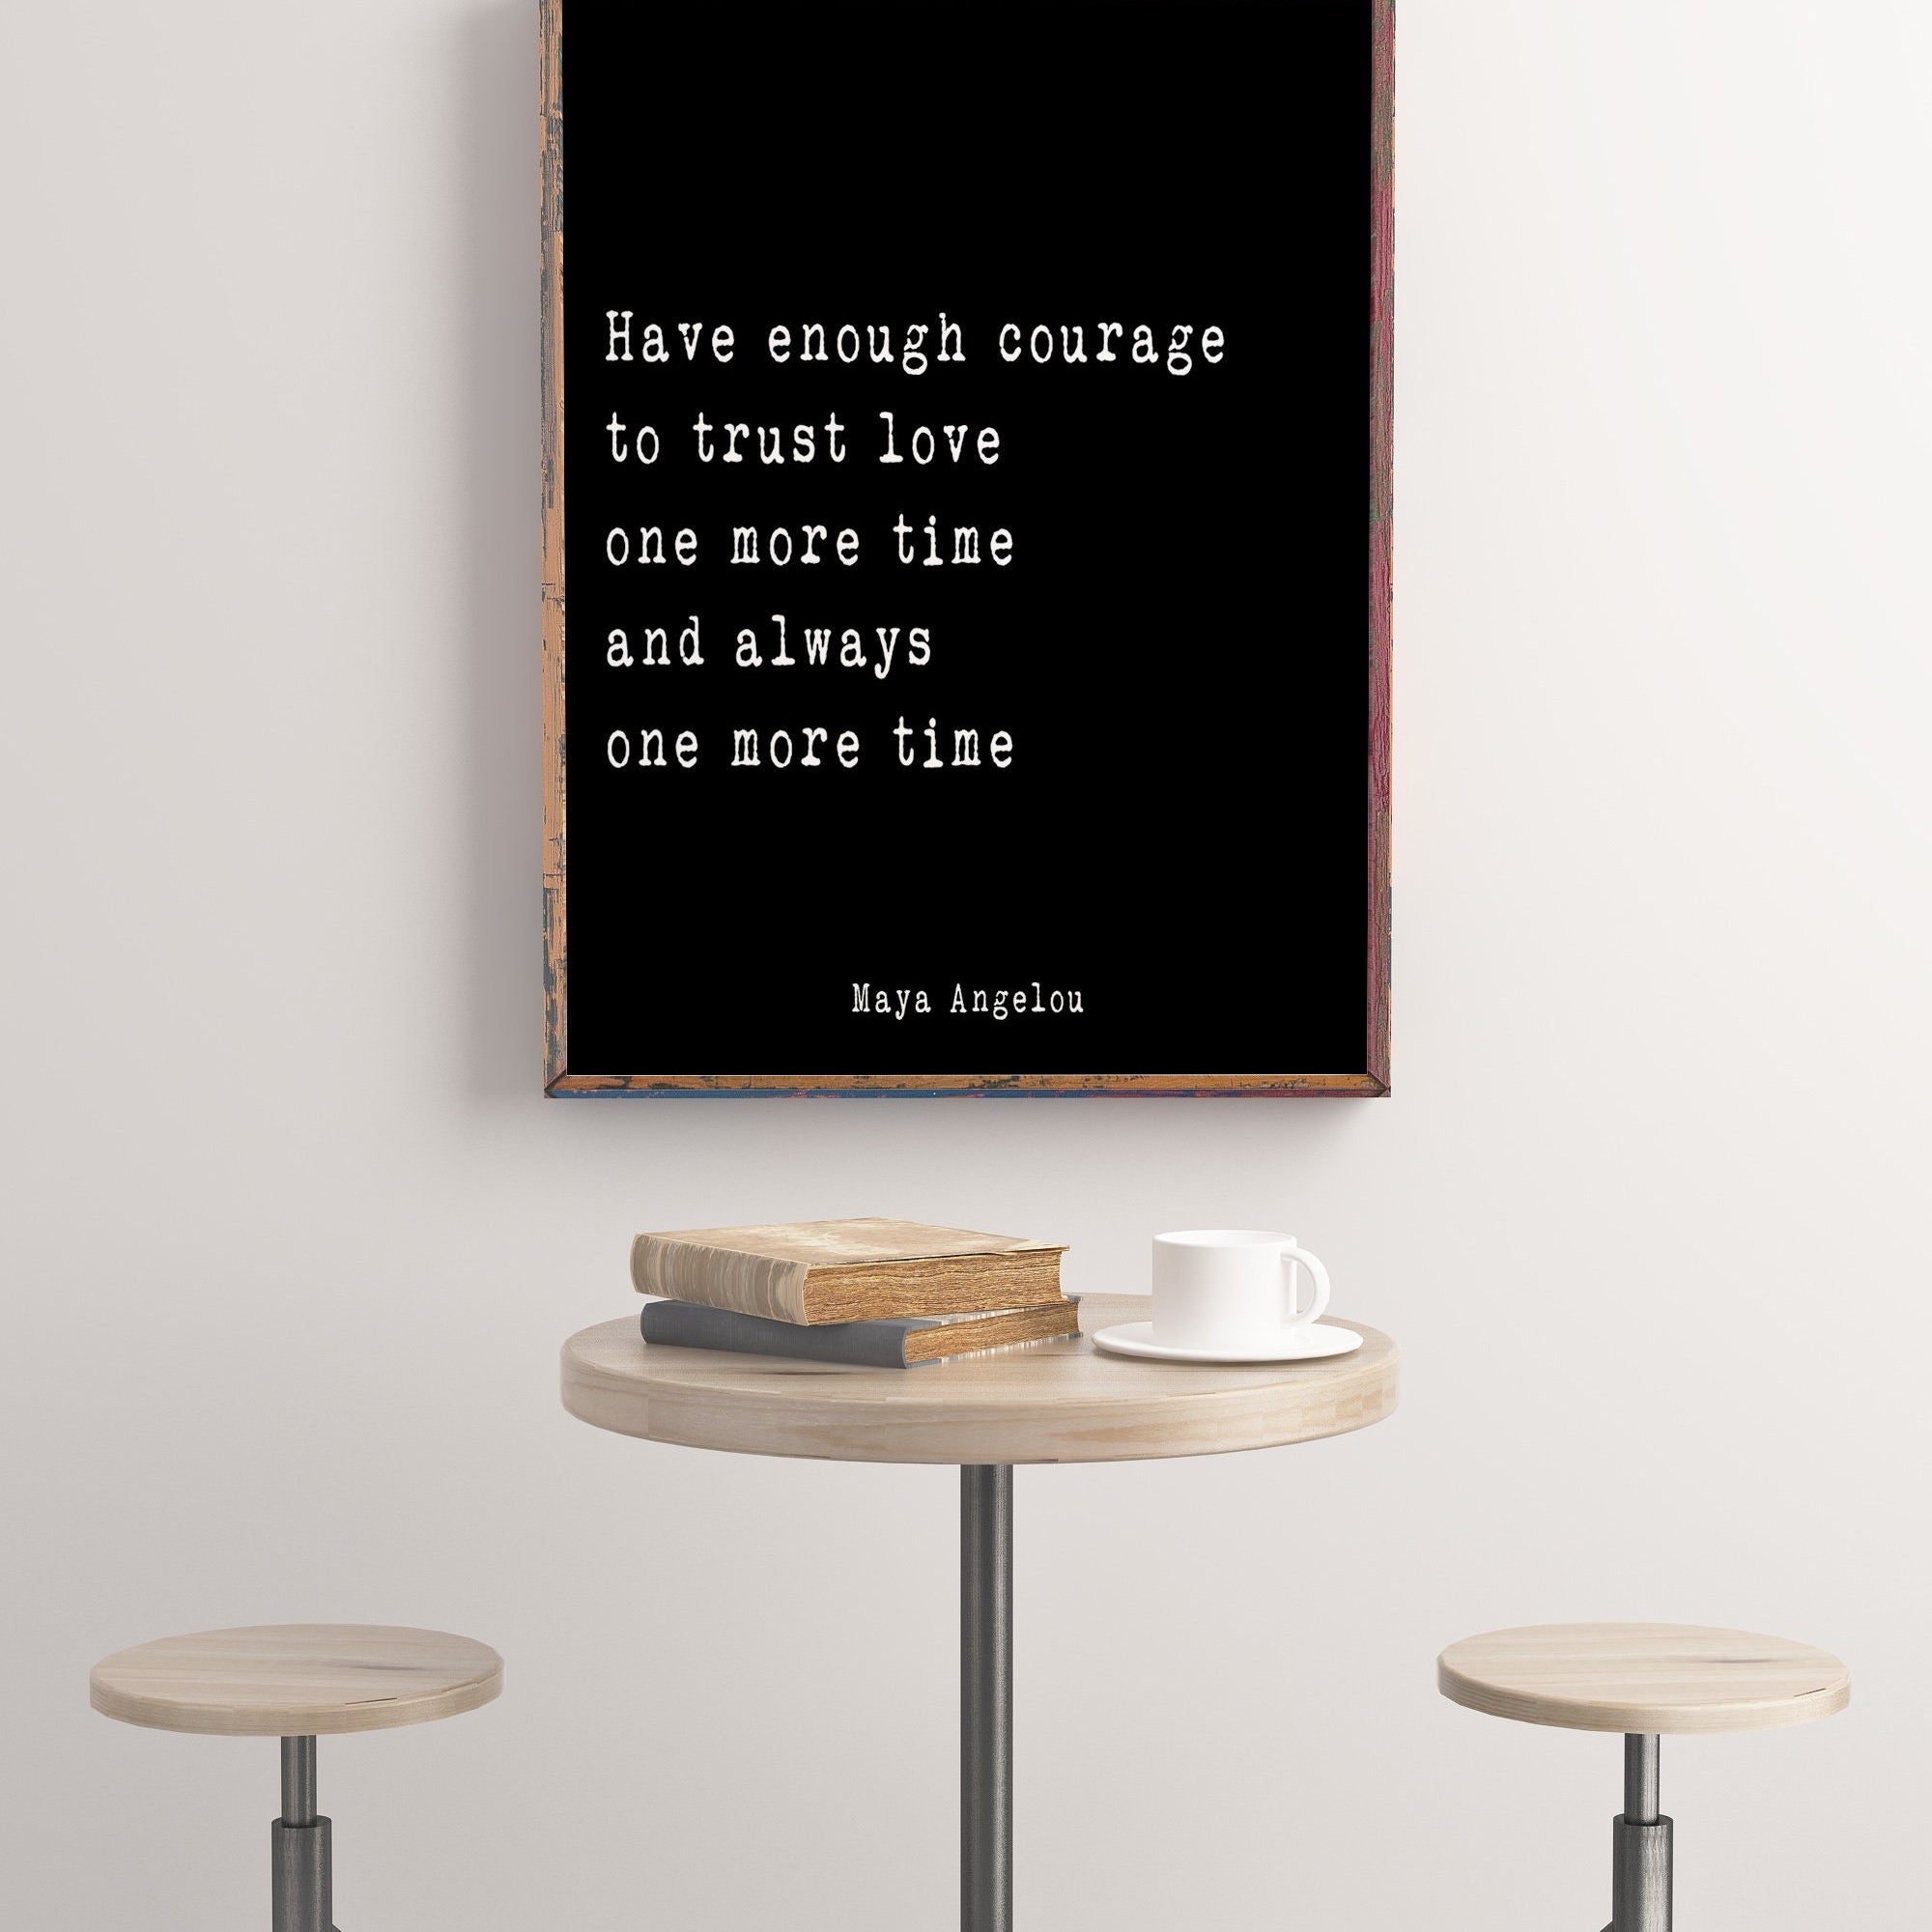 Maya Angelou Quote Print, Have enough courage to trust love